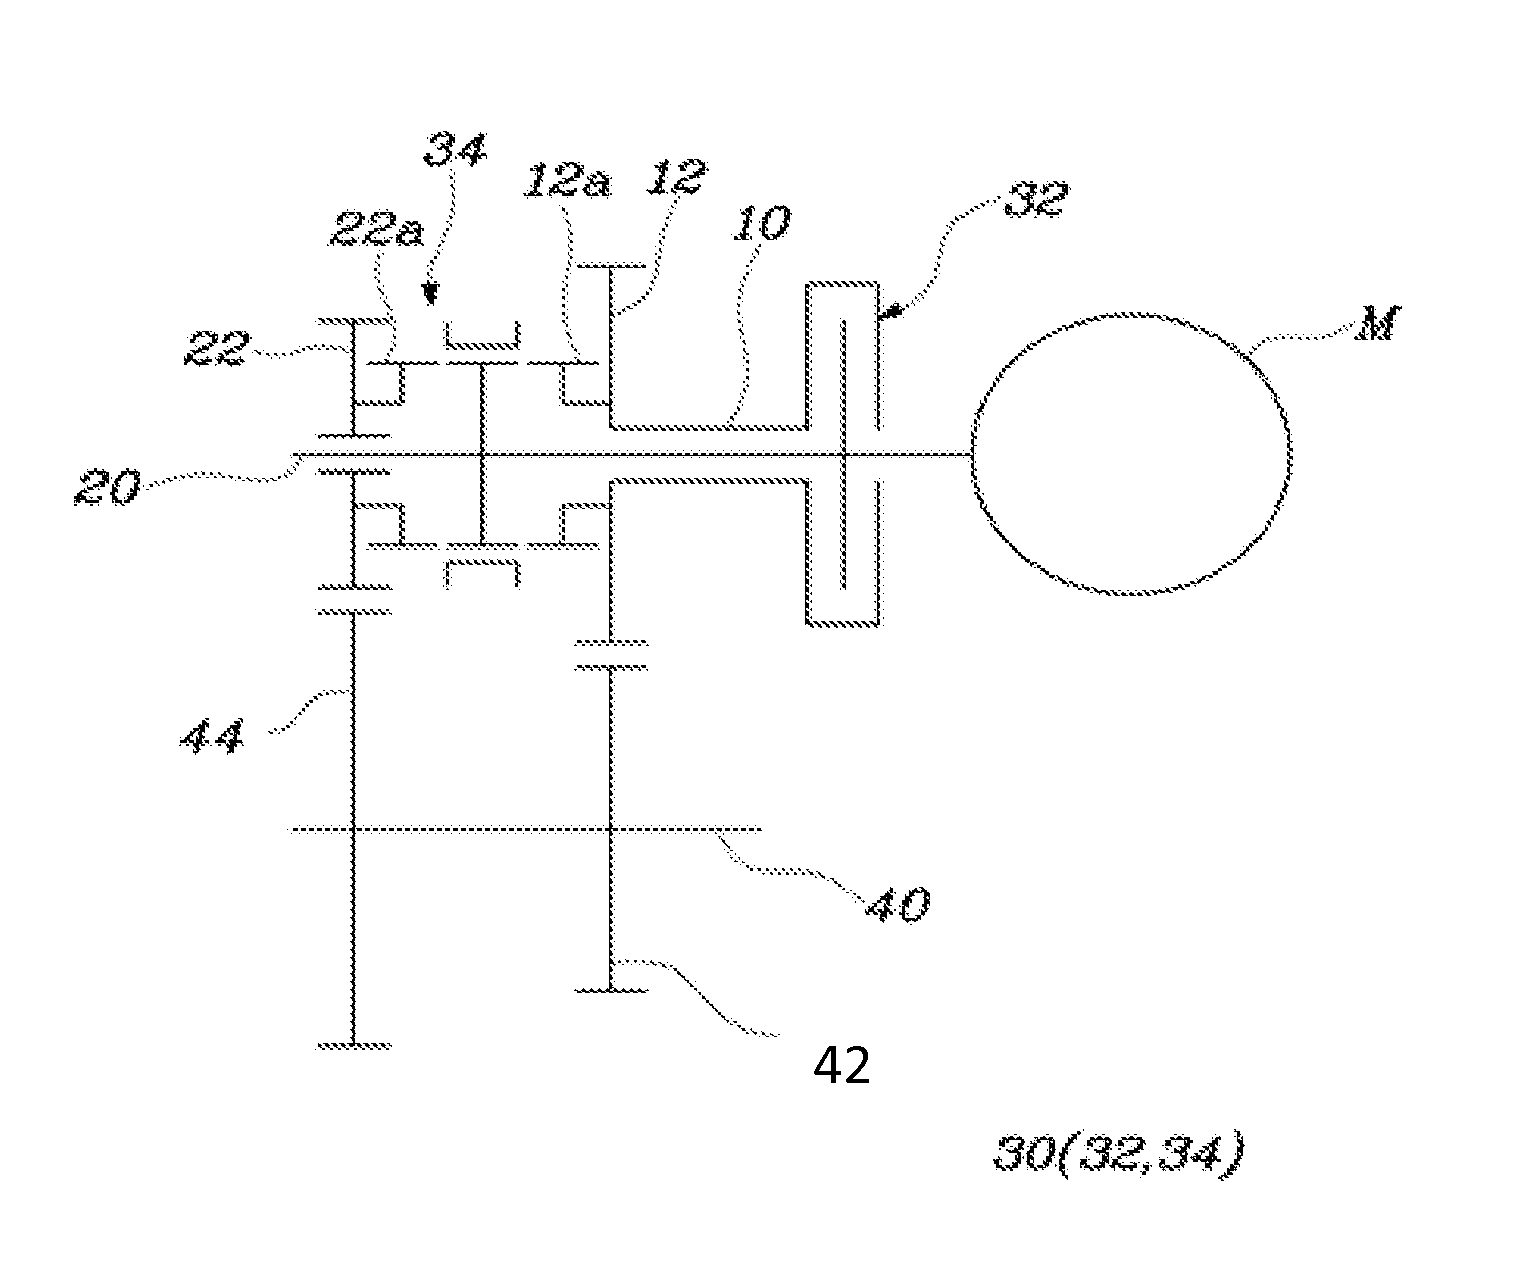 Two-speed transmission for vehicle